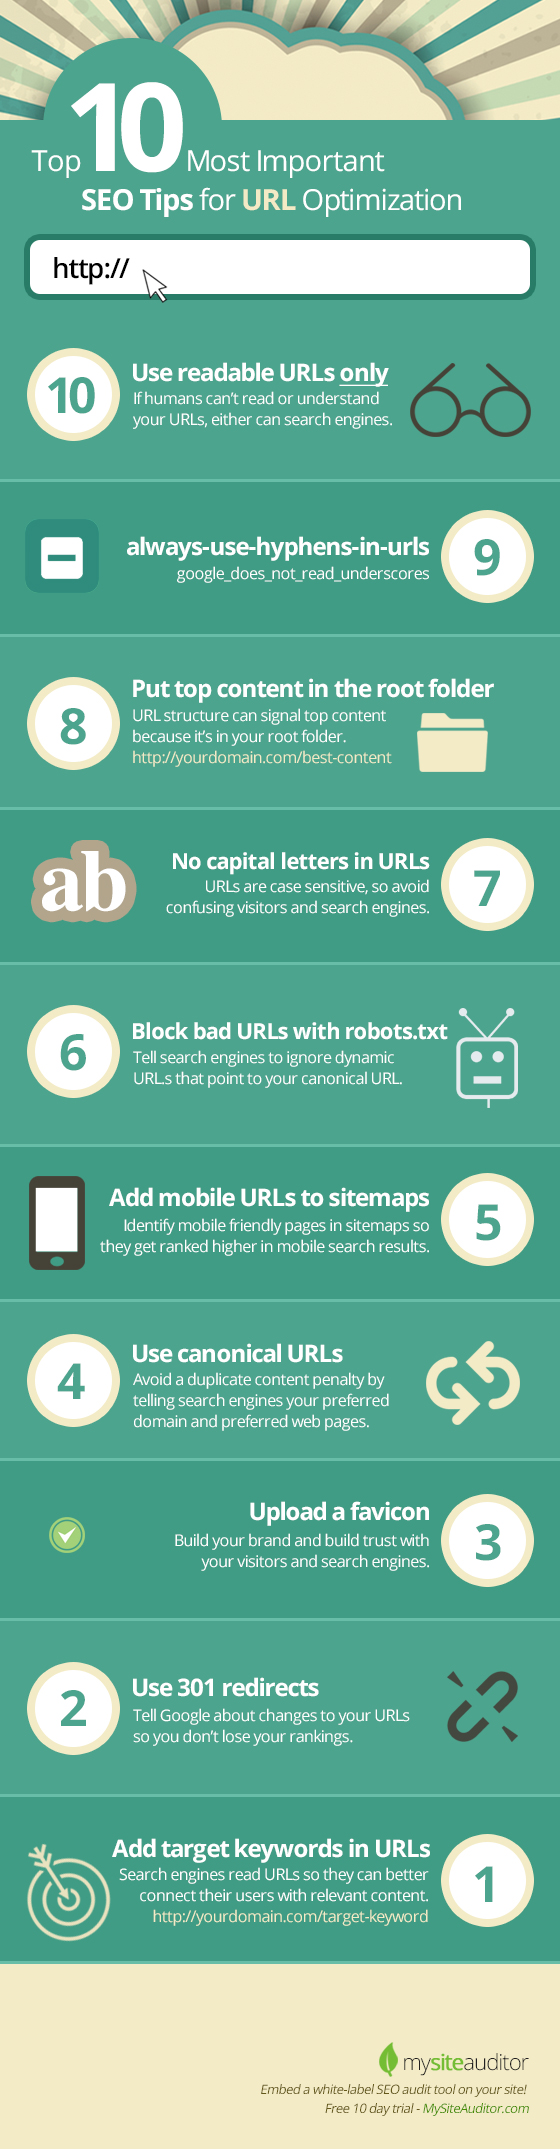 how to optimize url for seo